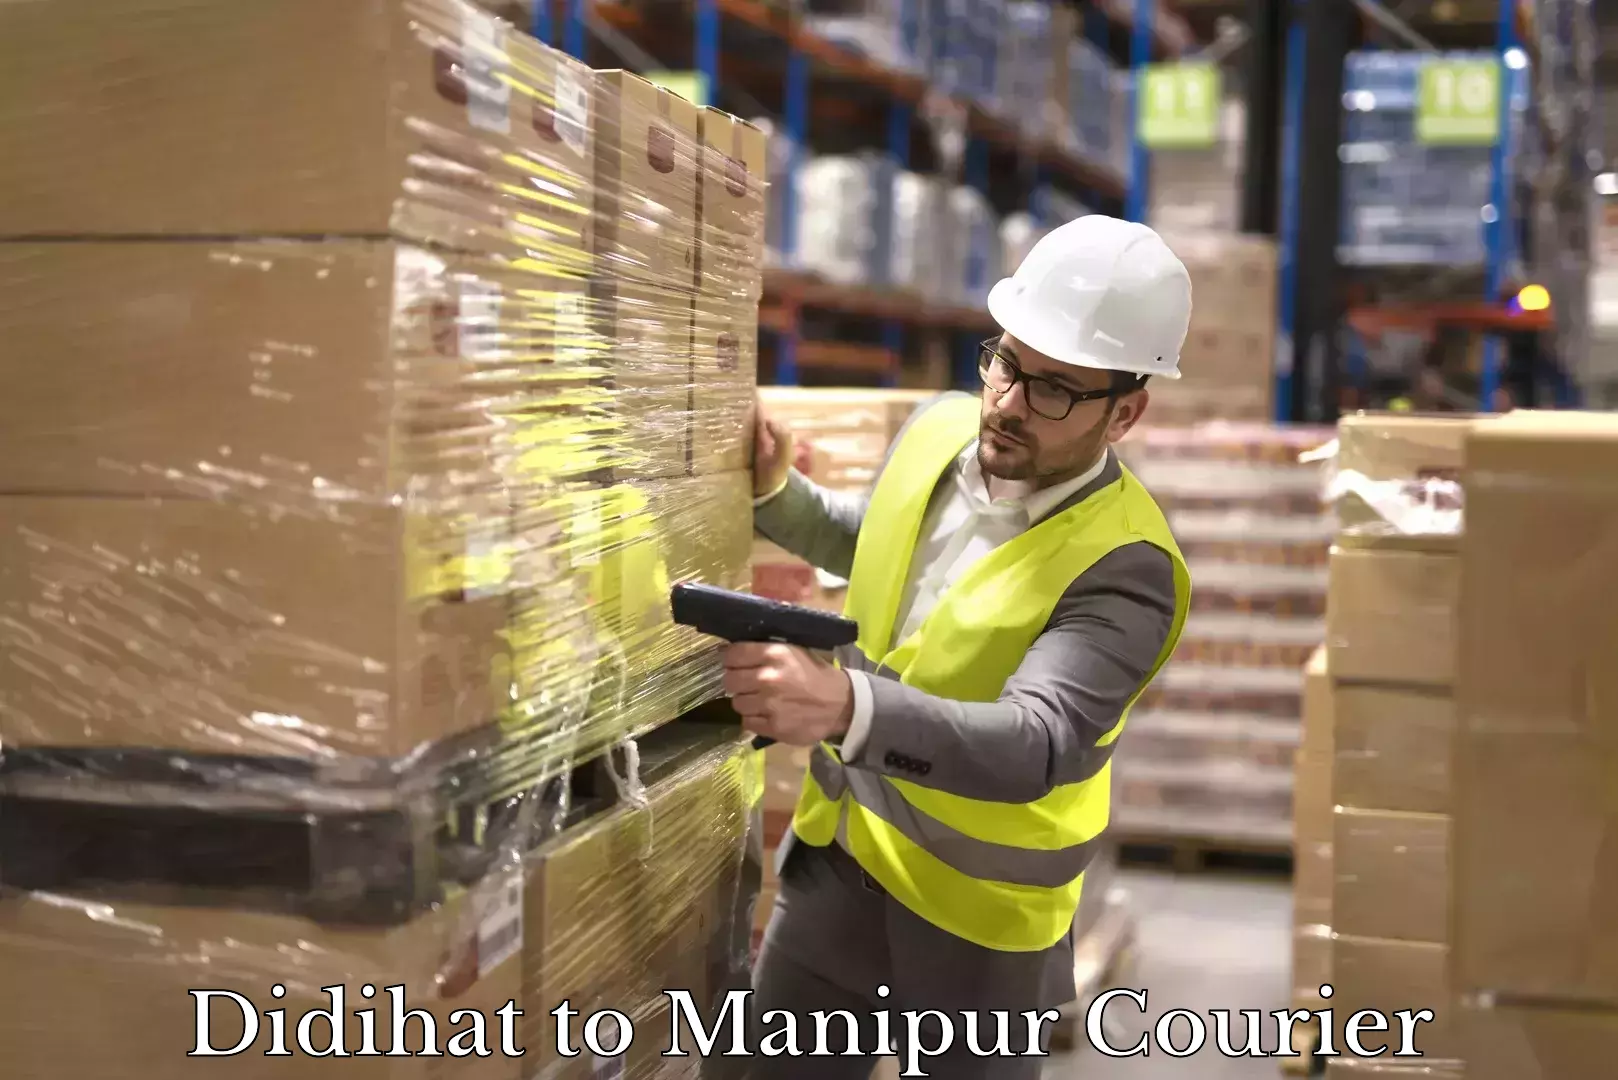 Courier service partnerships Didihat to Manipur